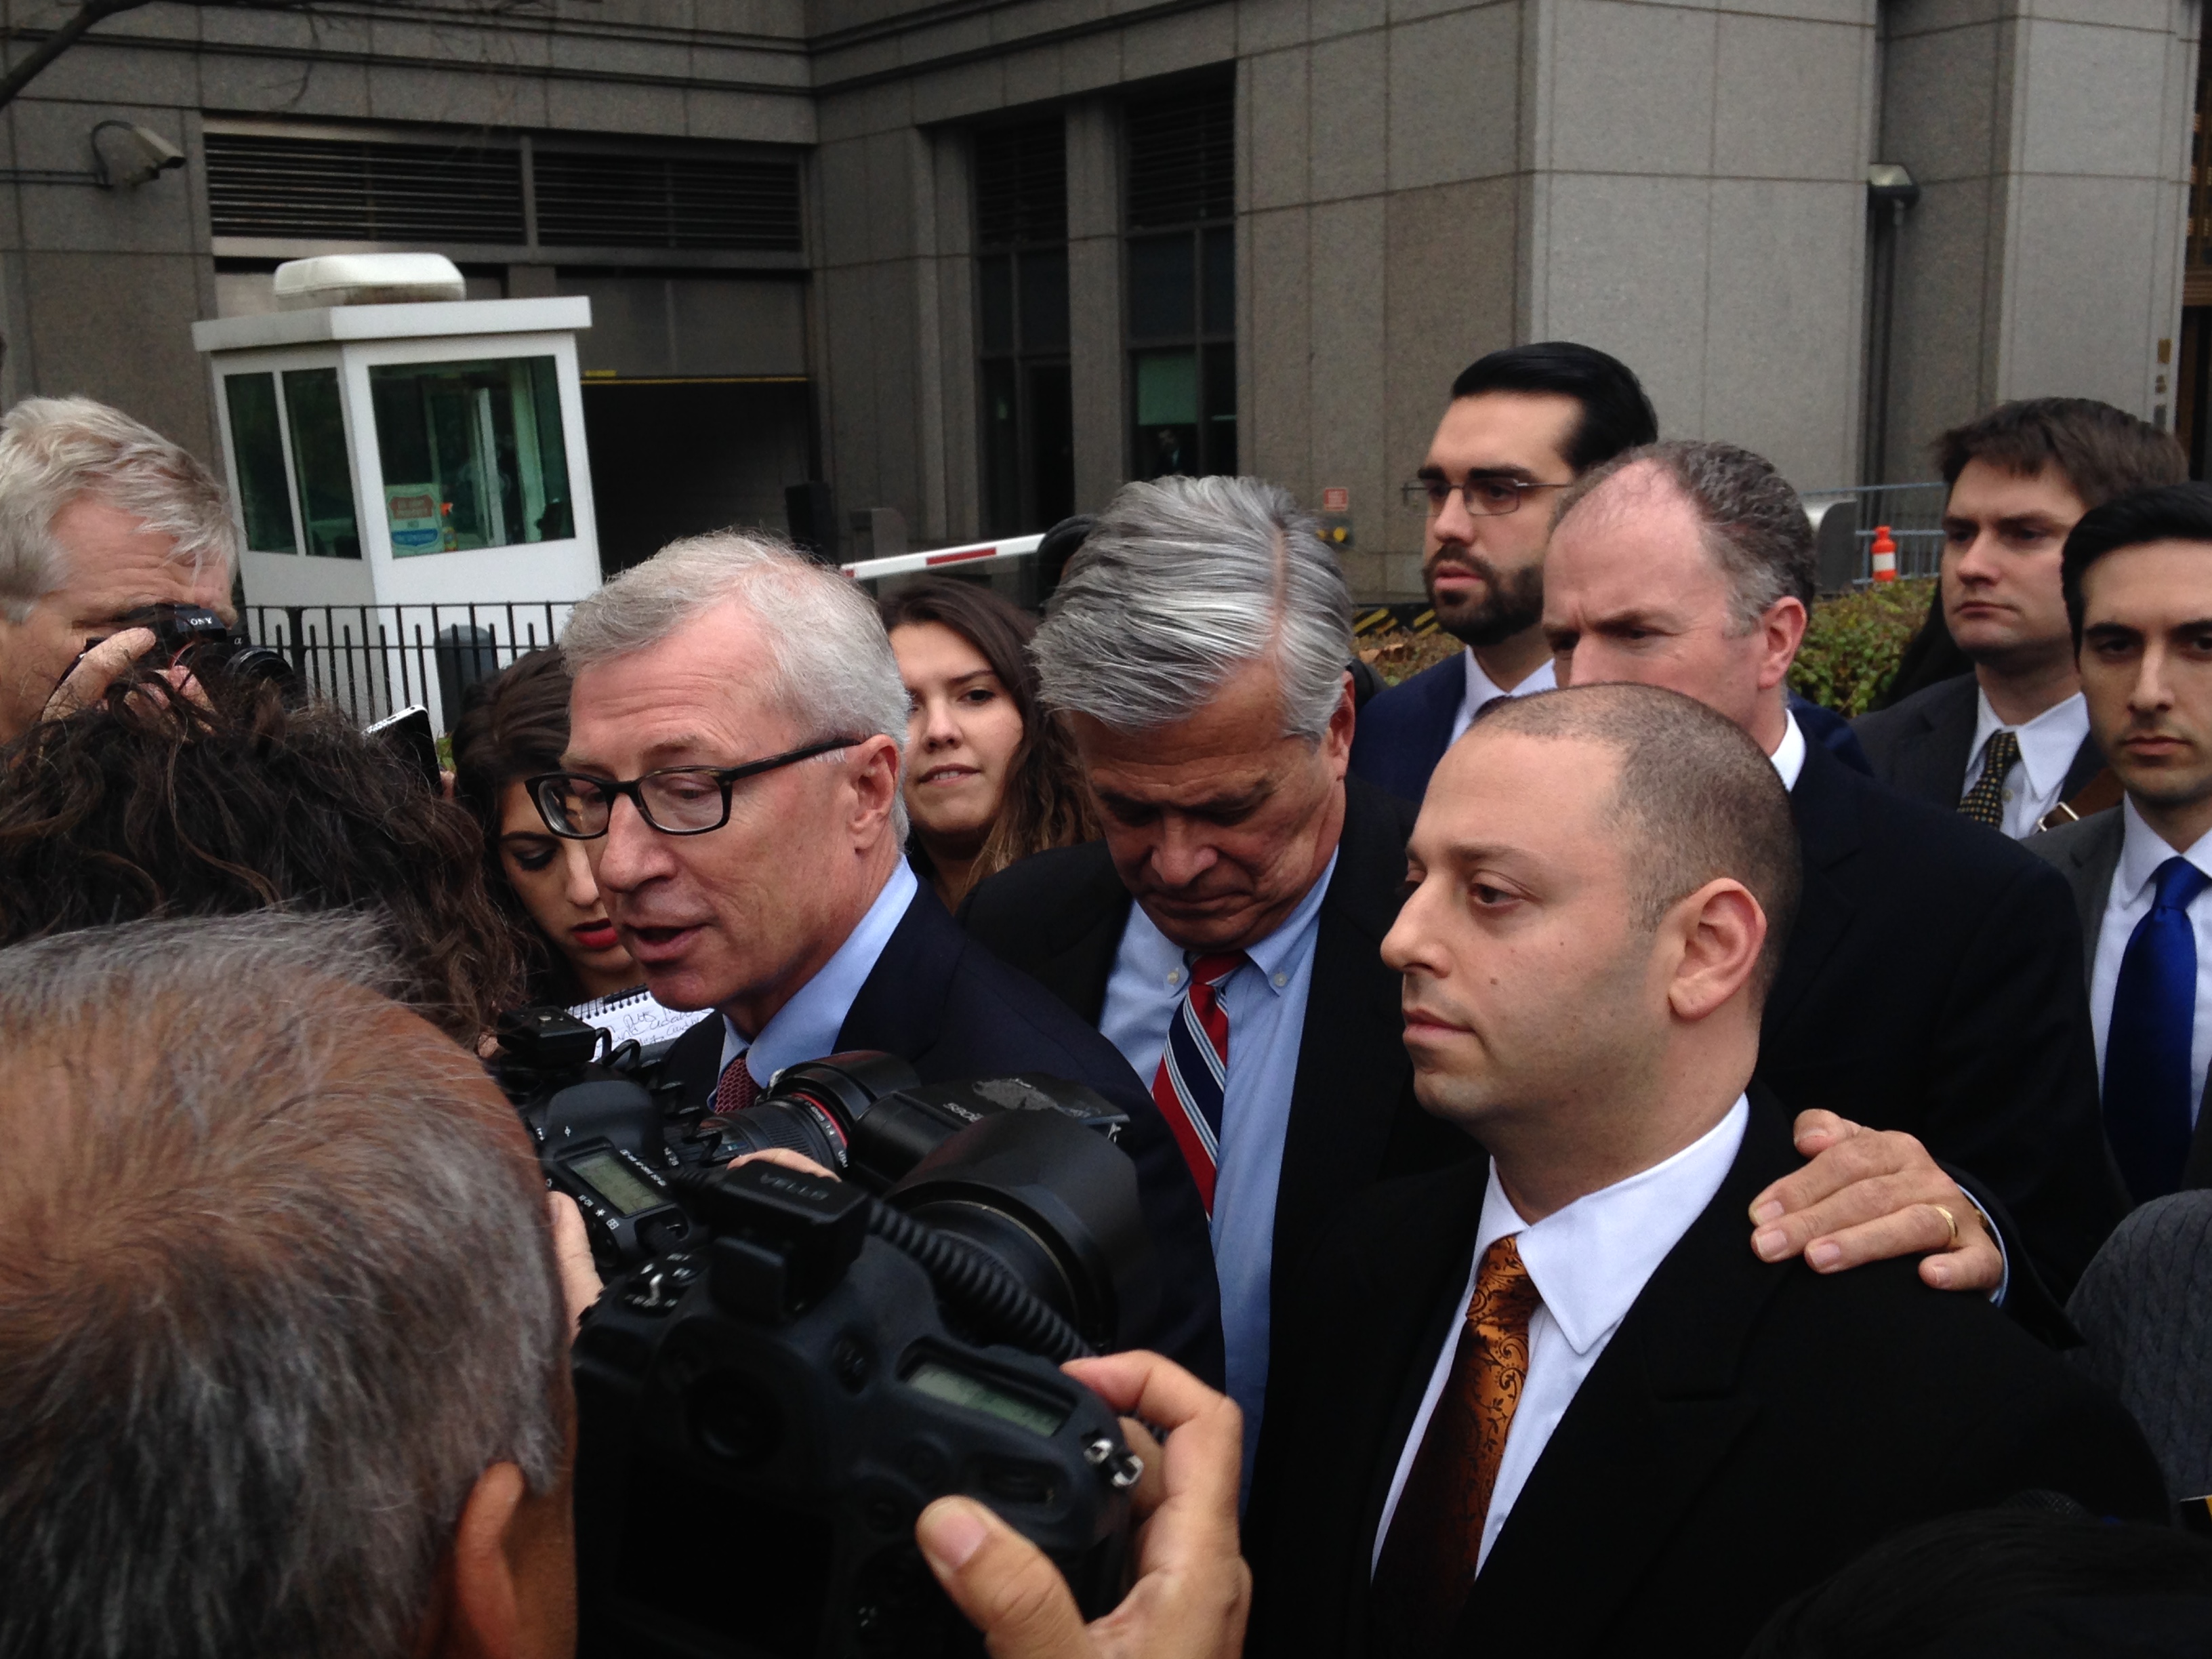 Former State Senate Majority Leader Dean Skelos and his son Adam leave court after being found guilty. (Photo: Will Bredderman for Observer)